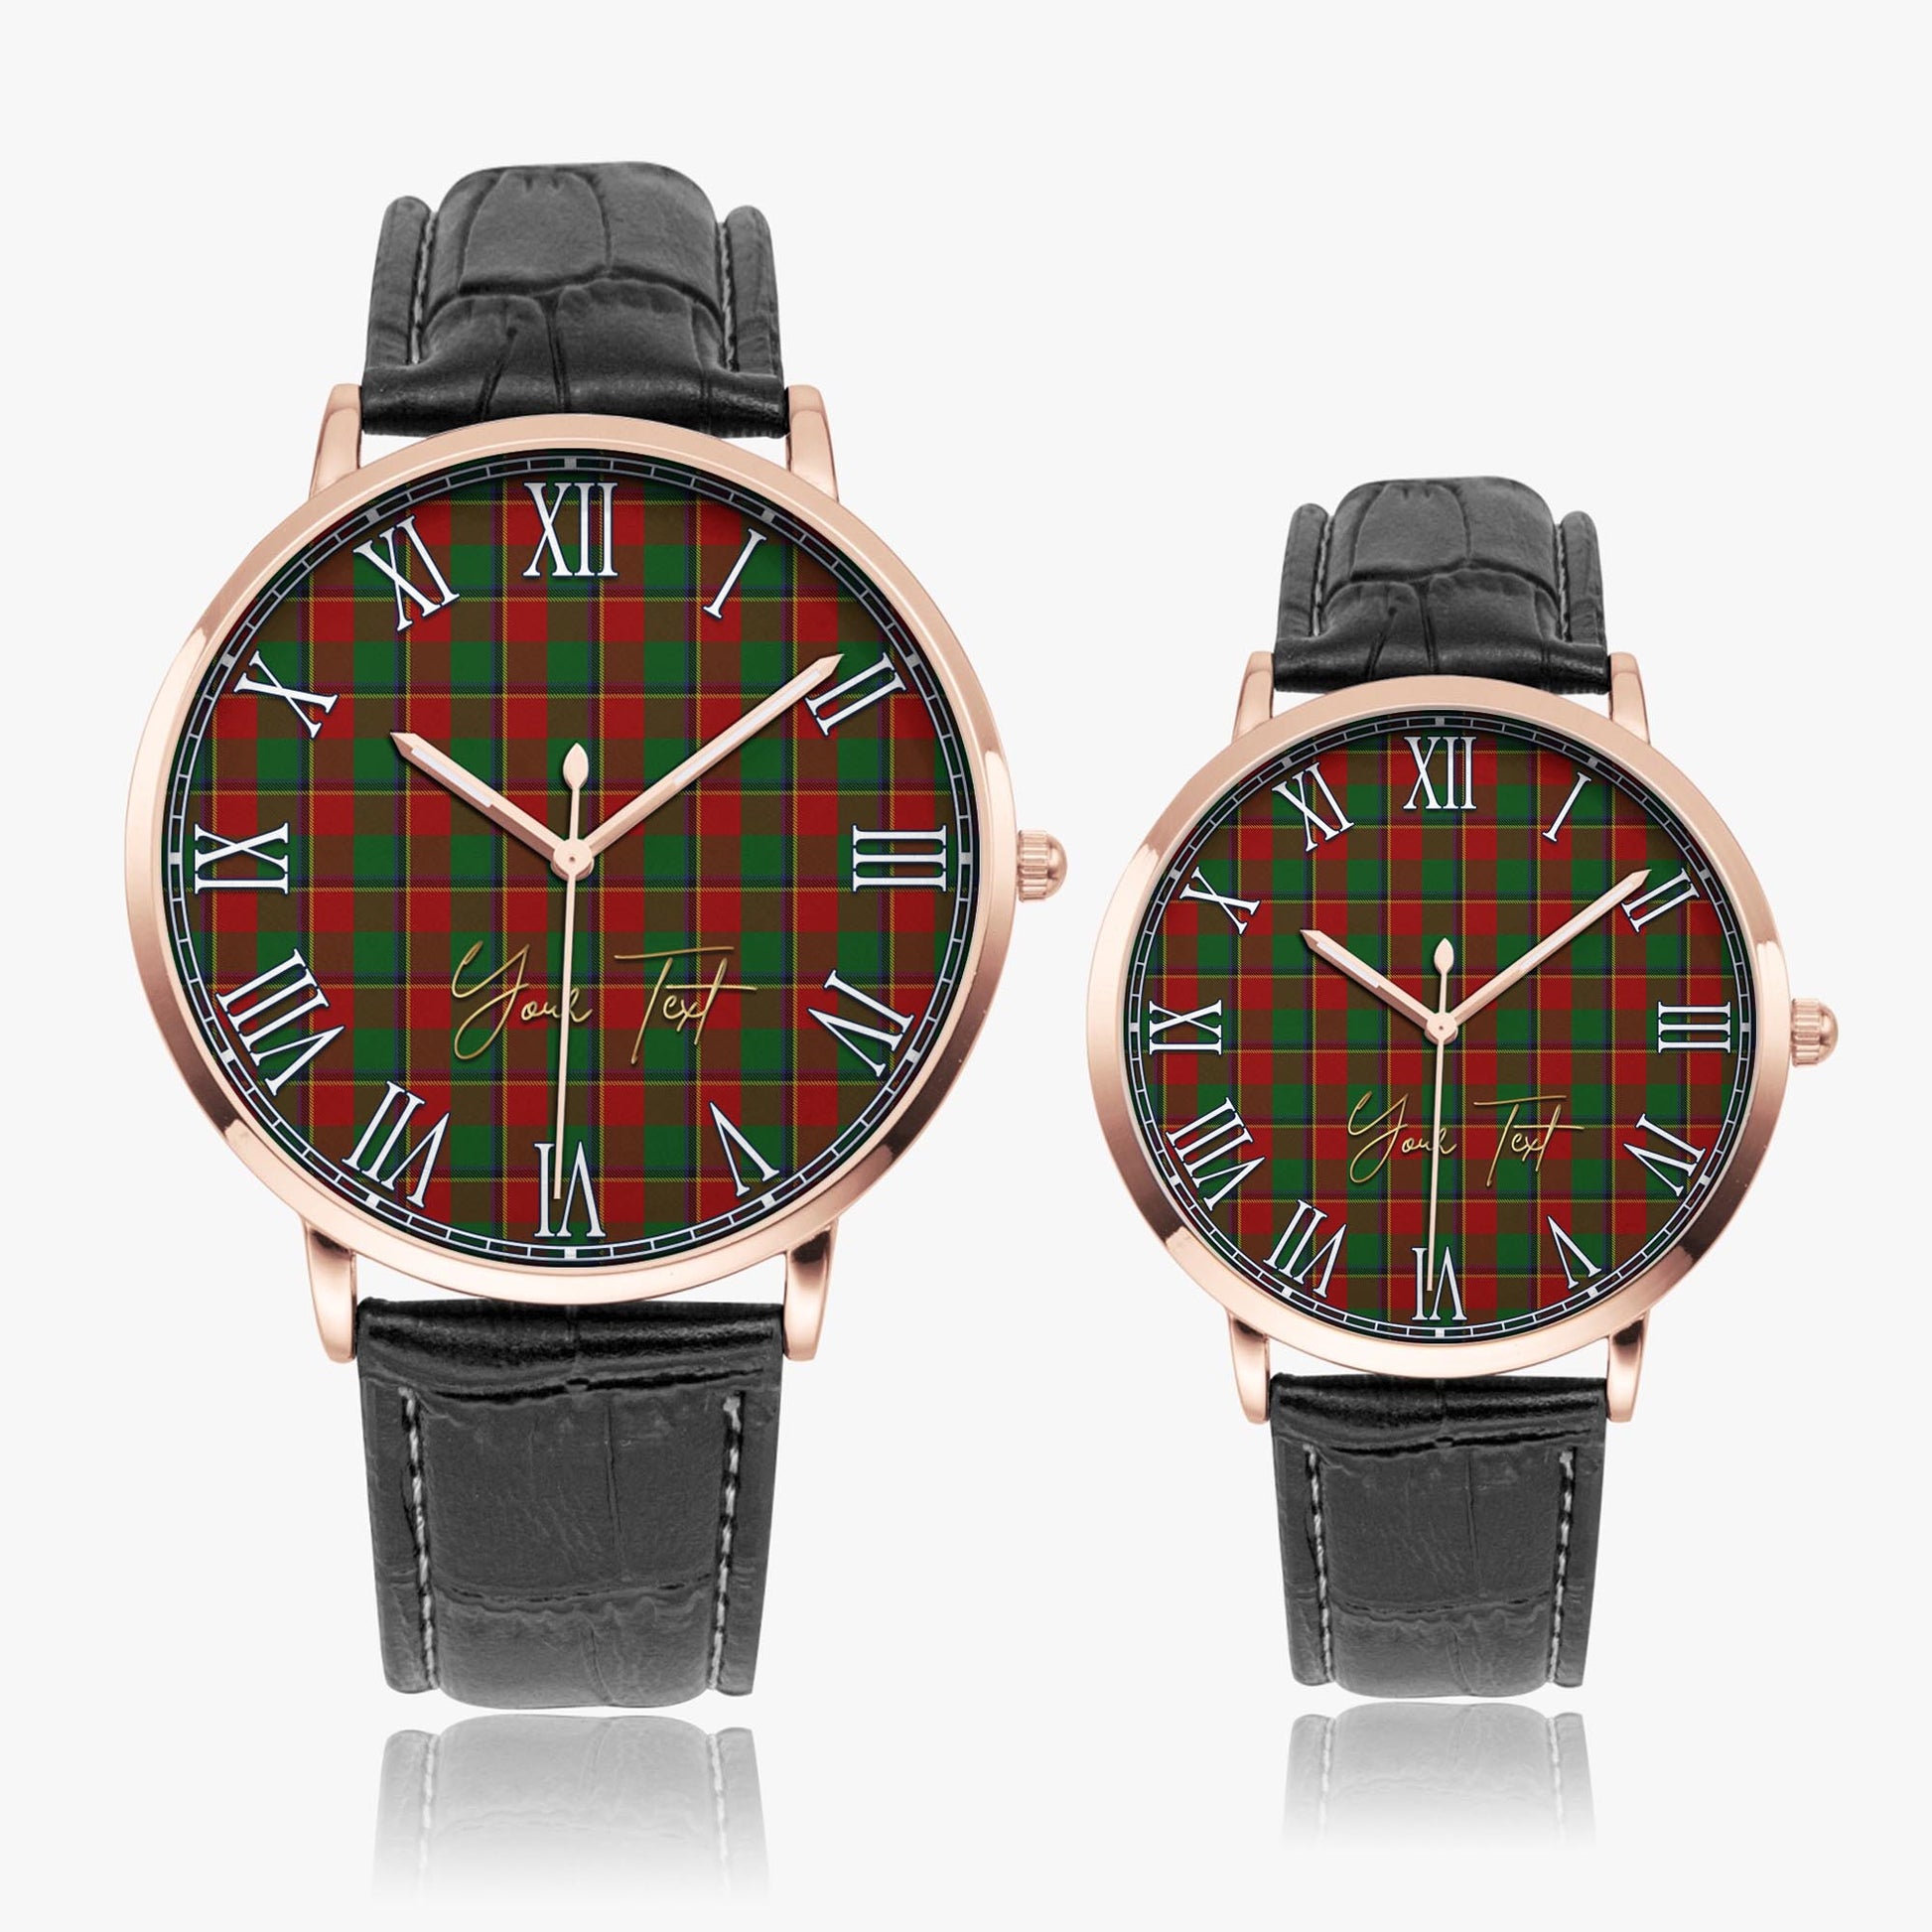 Turnbull Dress Tartan Personalized Your Text Leather Trap Quartz Watch Ultra Thin Rose Gold Case With Black Leather Strap - Tartanvibesclothing Shop